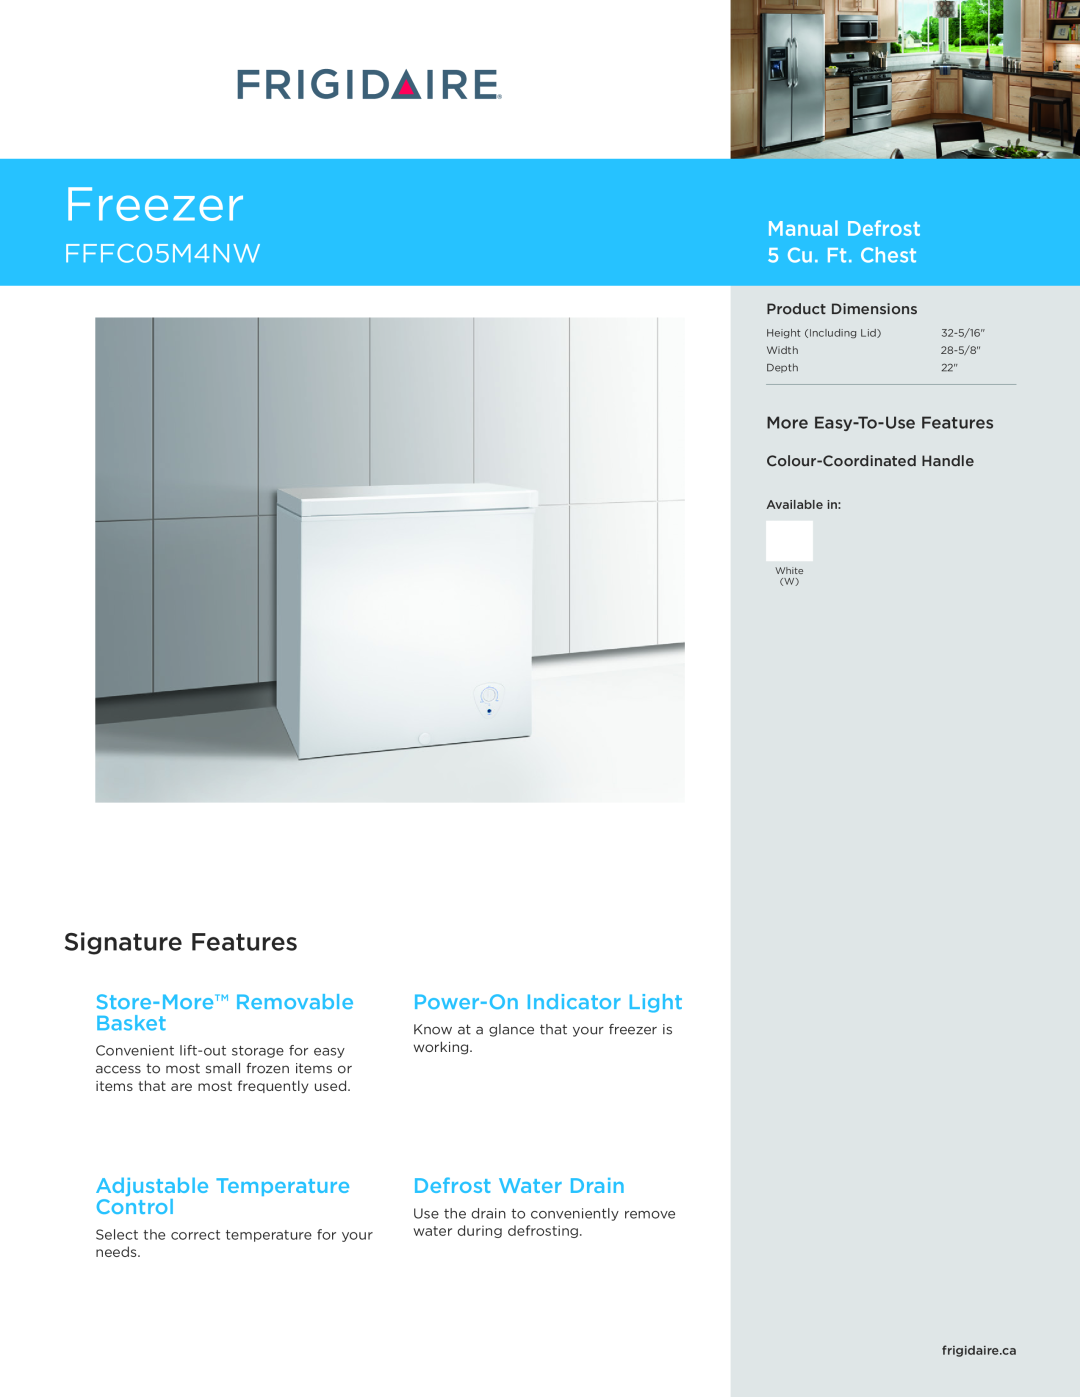 Frigidaire FFFC05M4NW dimensions Freezer, Signature Features, Manual Defrost 5 Cu. Ft. Chest, Store-MoreRemovable Basket 